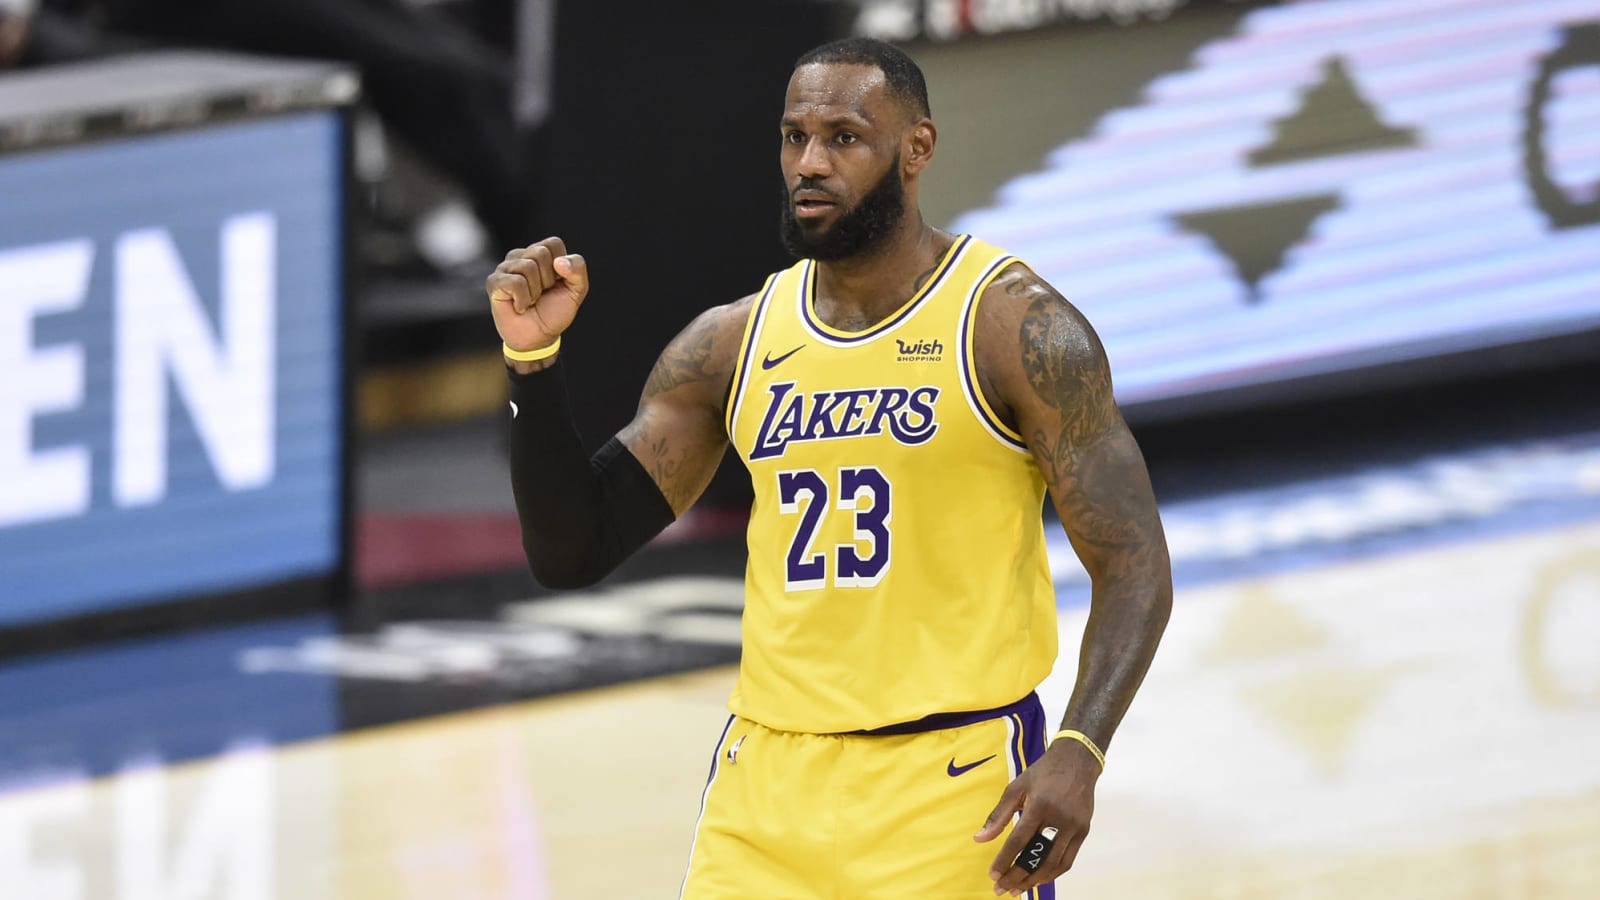 LeBron James sends funny Twitter response about fan after incident